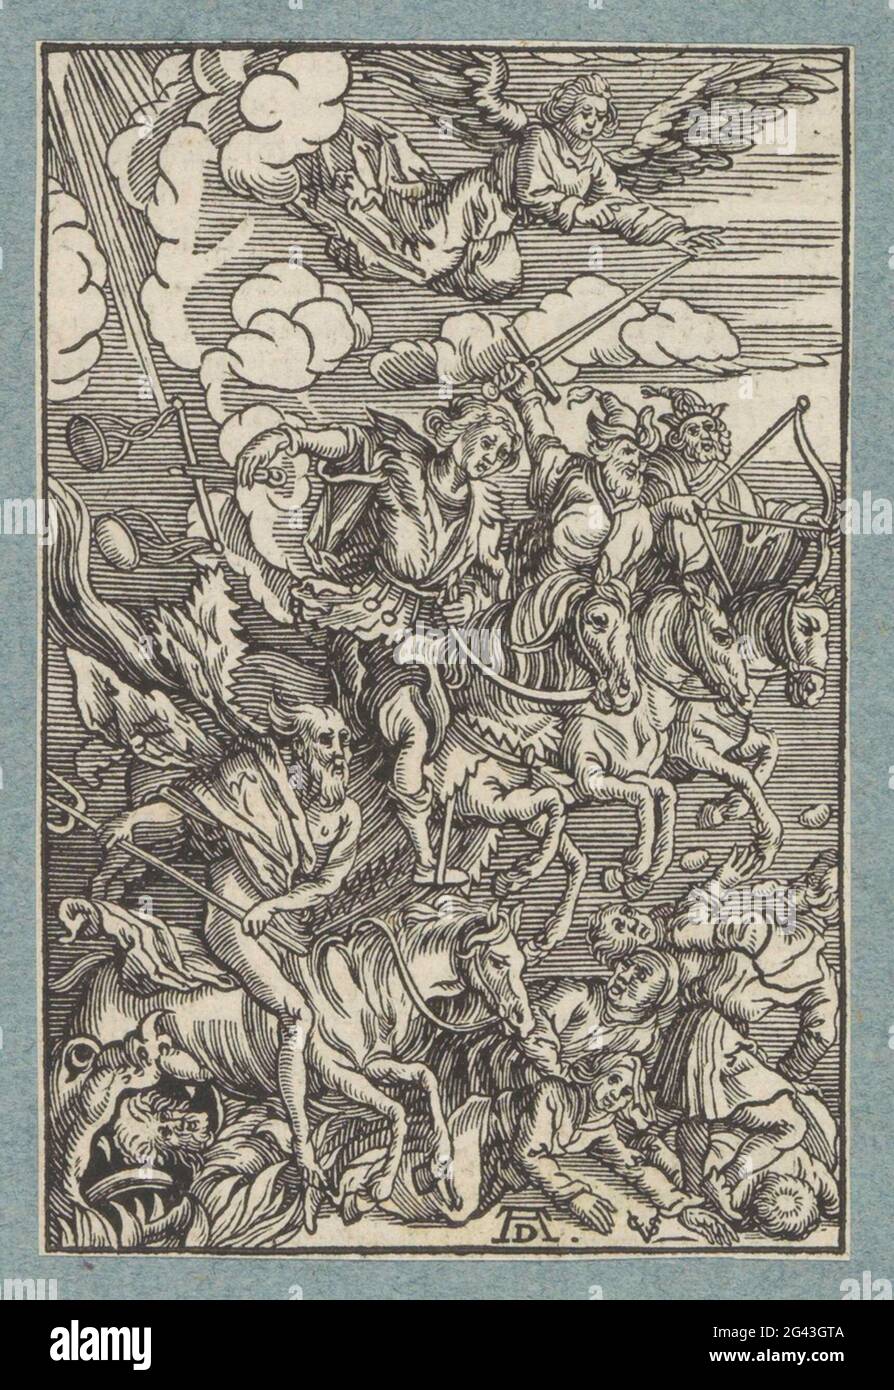 The four riders of the apocalypse. Four men on horseback, armed with an arrow and bow, a sword, a scales and a riek, people walk under the foot. An angel above that. The print is part of an album. Stock Photo